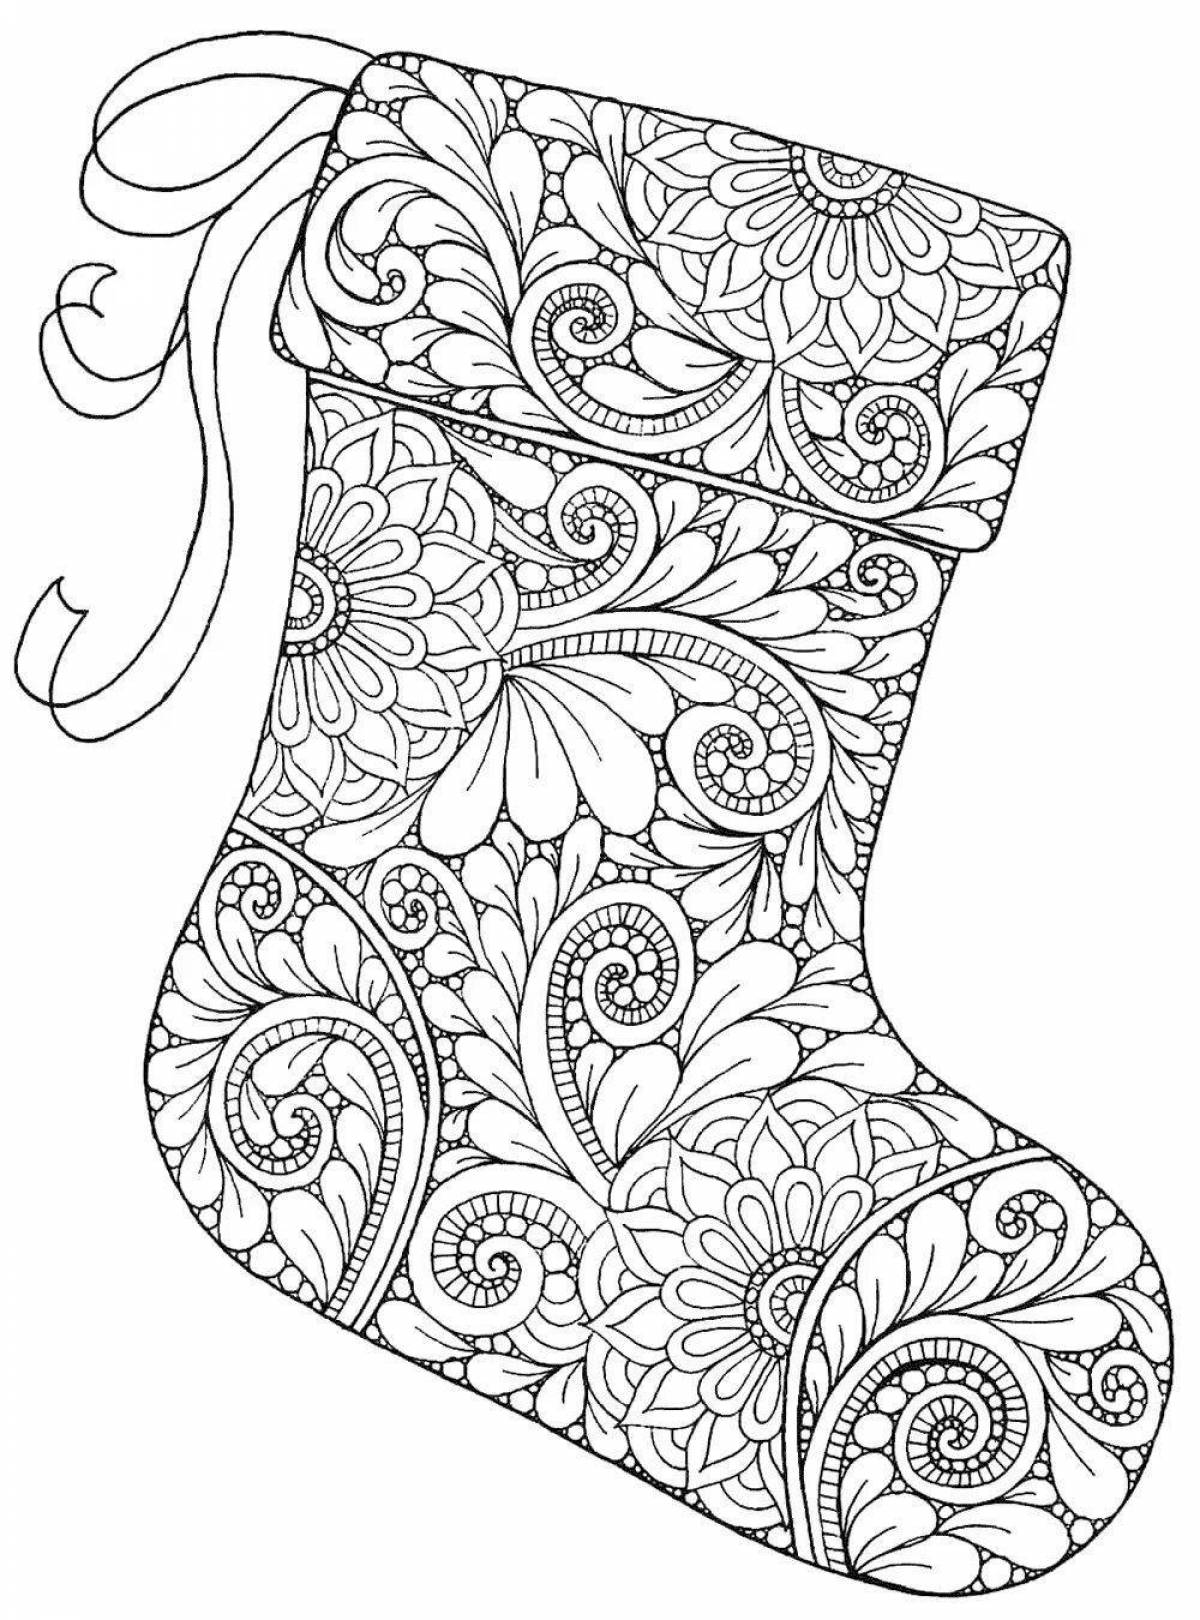 Funny Christmas coloring book